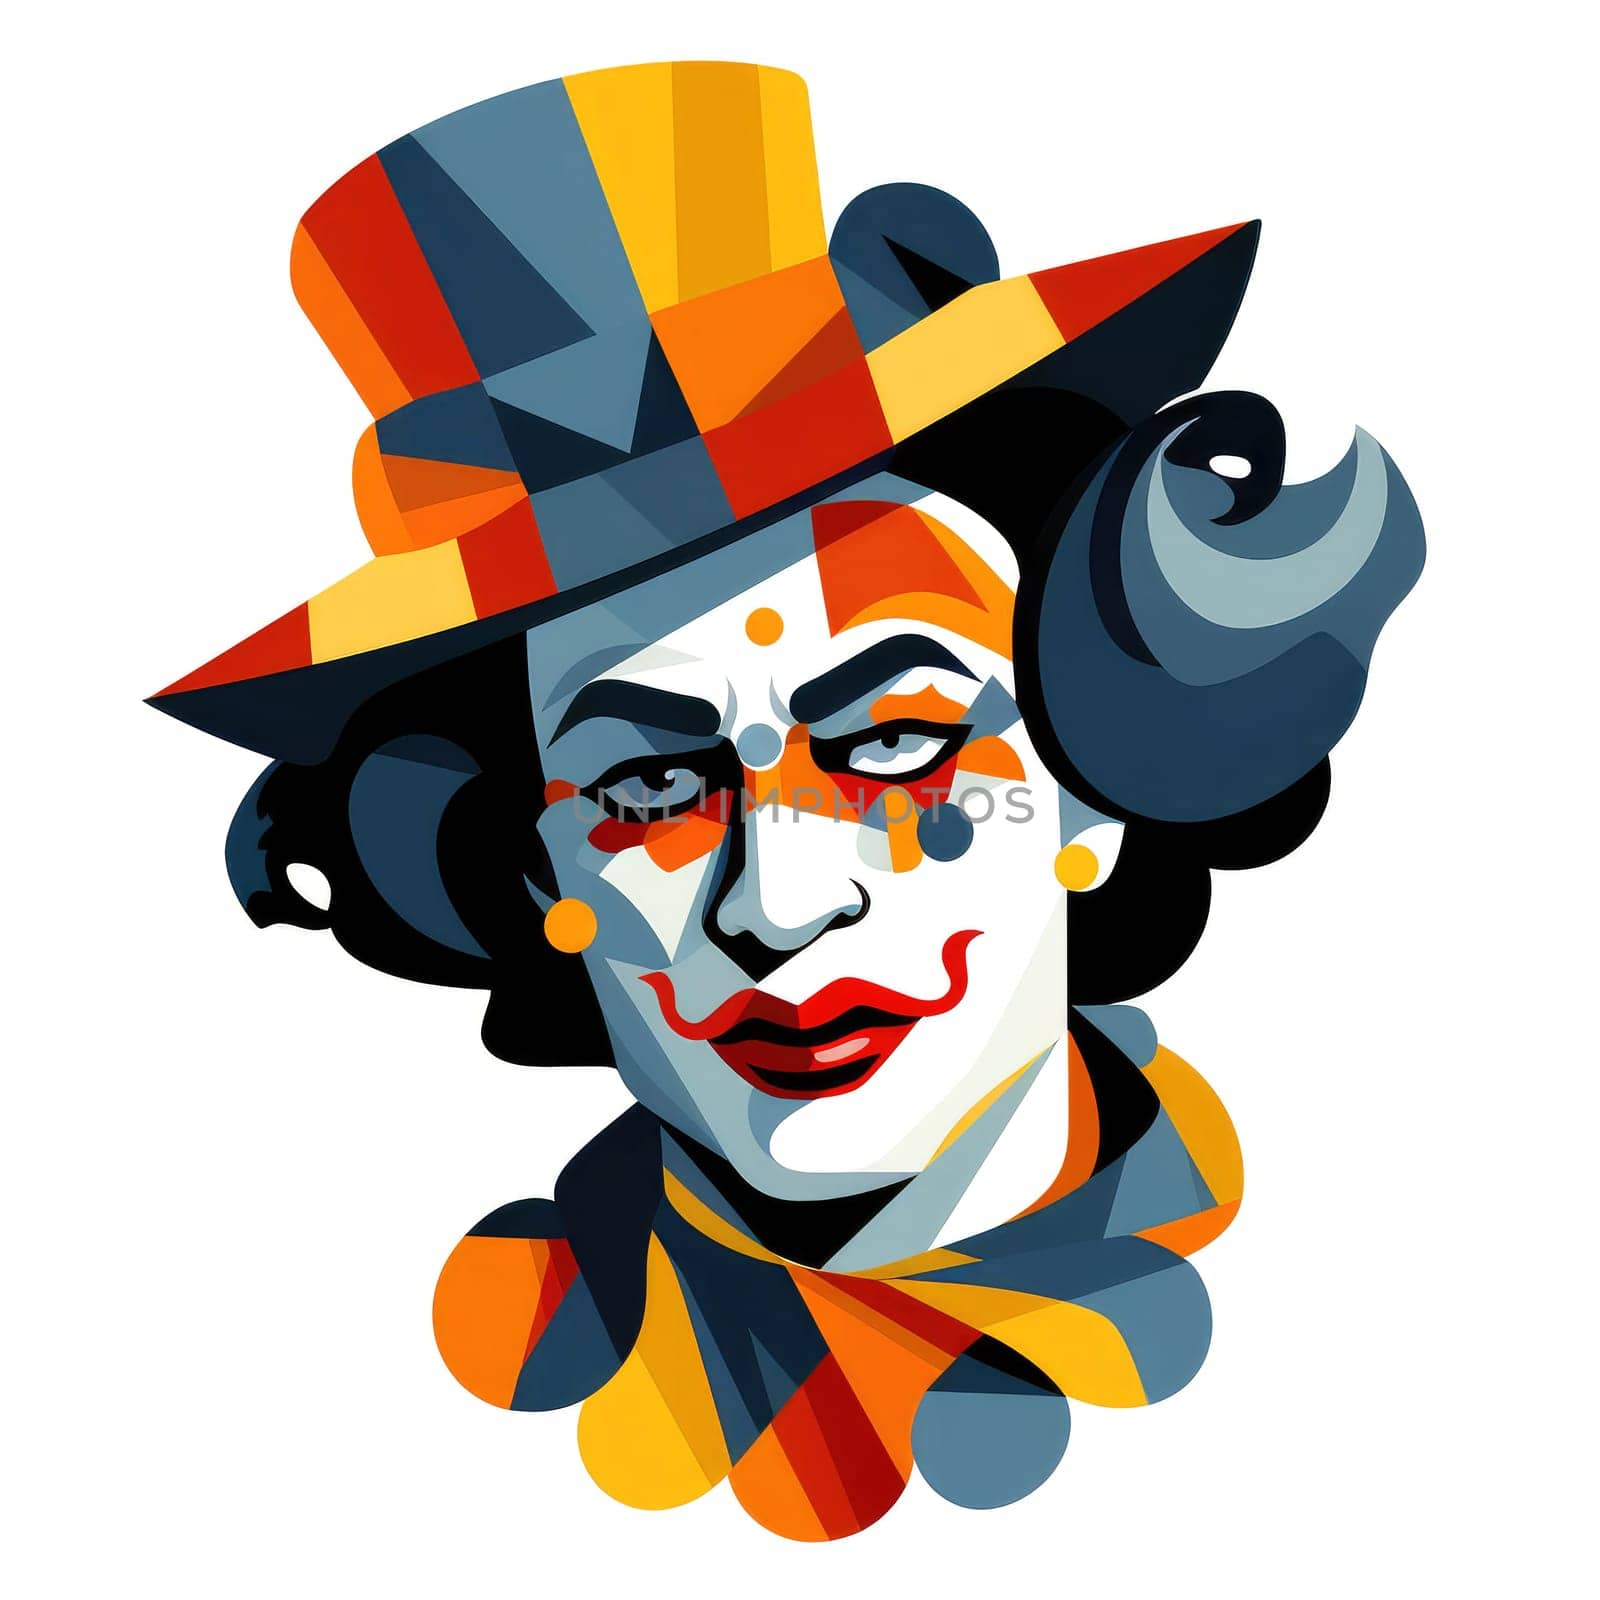 Abstract image of a clown in bright vector pop art style. Template for poster, sticker, t-shirt print, etc. Template for poster, sticker, t-shirt print, etc.